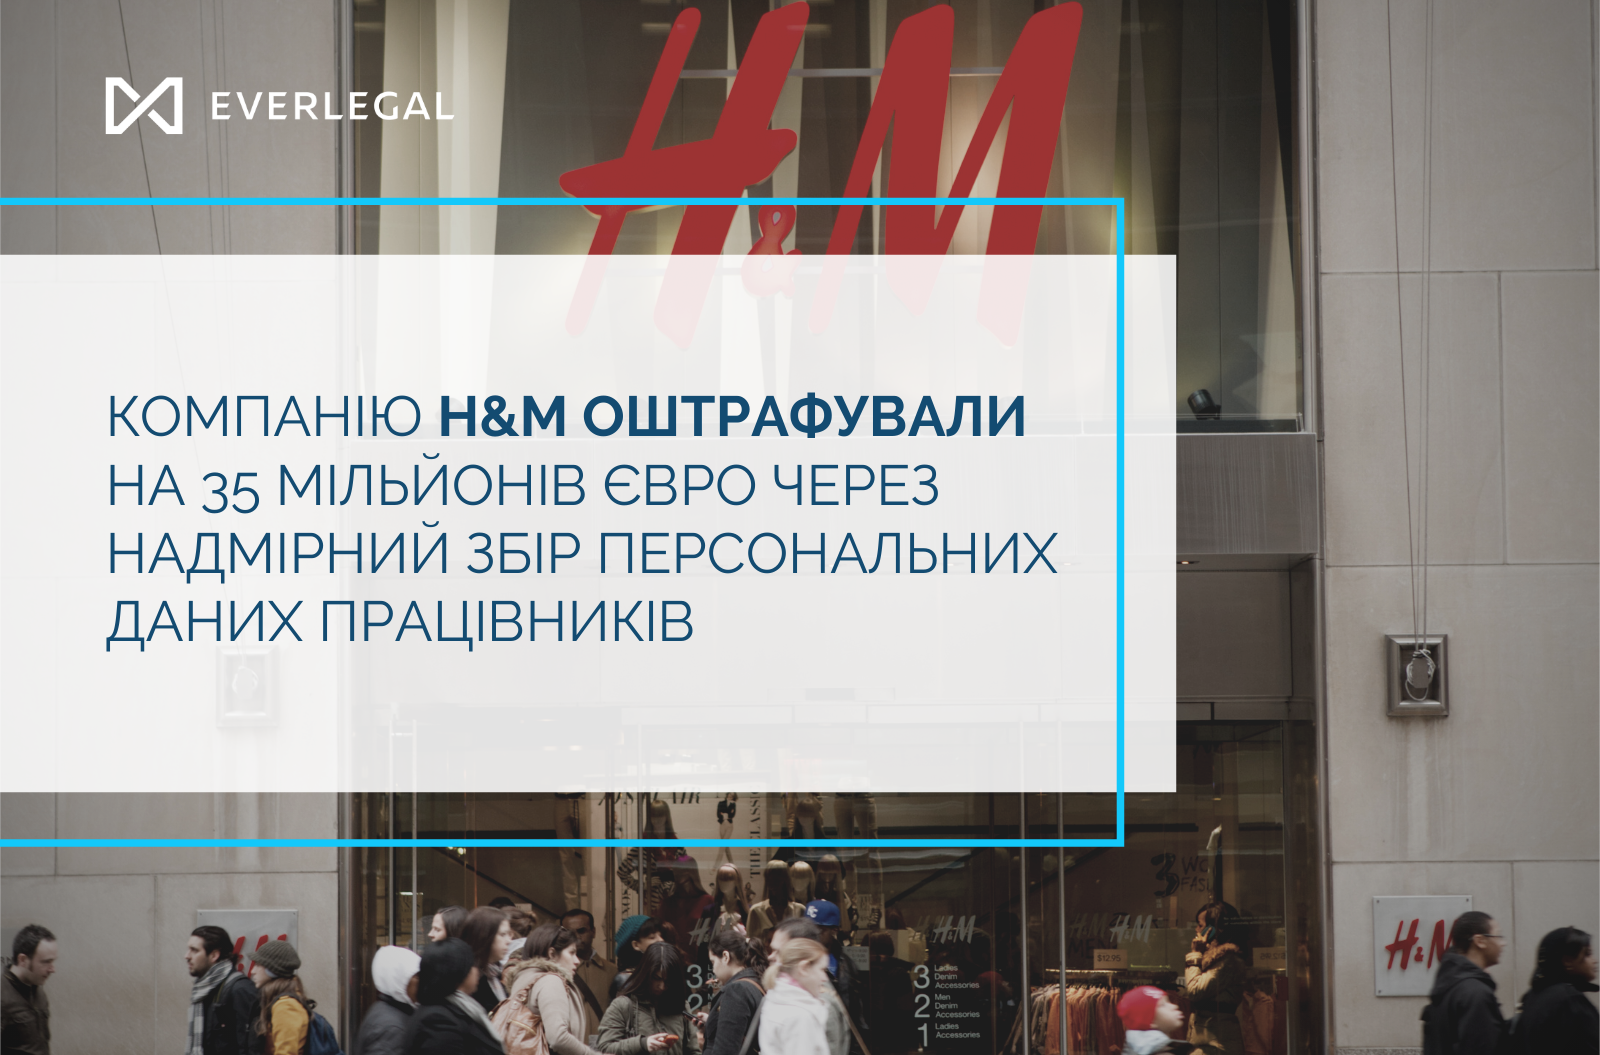 H&M was fined 35 million euros for excessive collection of personal data of employees